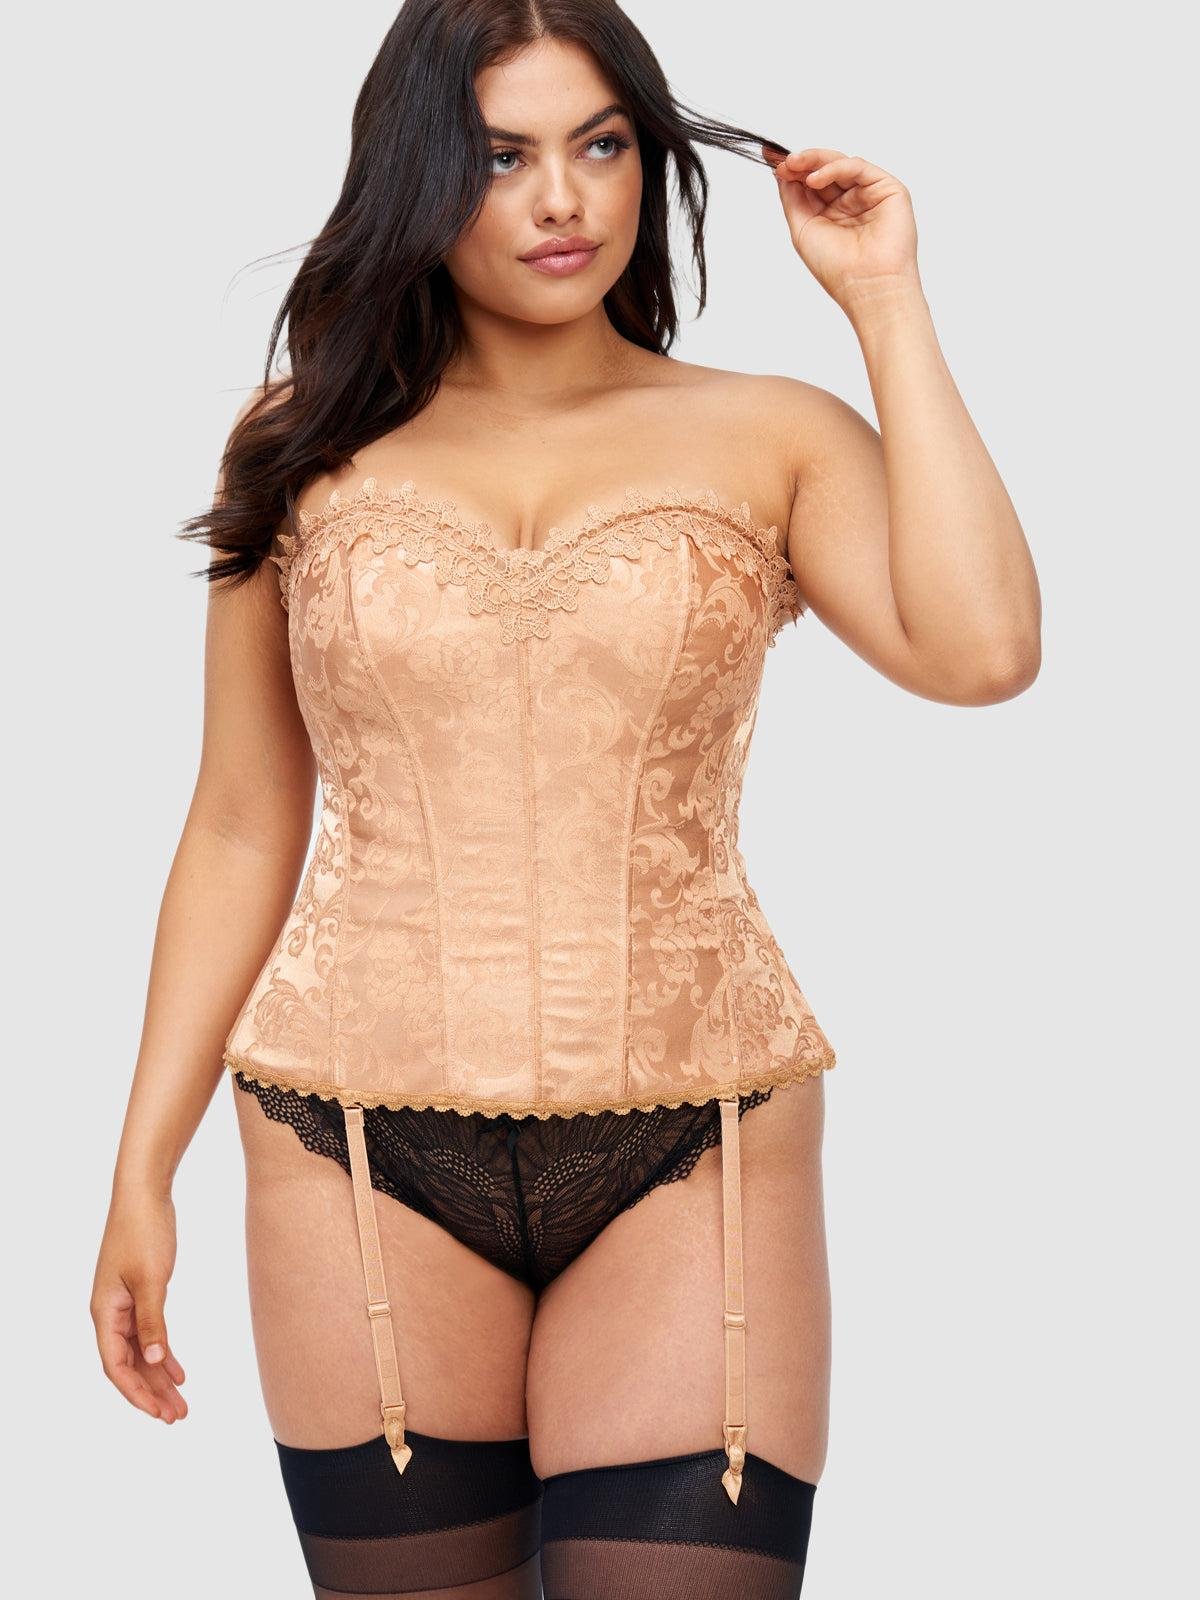 Hollywood Dream Sweetheart Corset in Toast by FREDERICK'S OF HOLLYWOOD